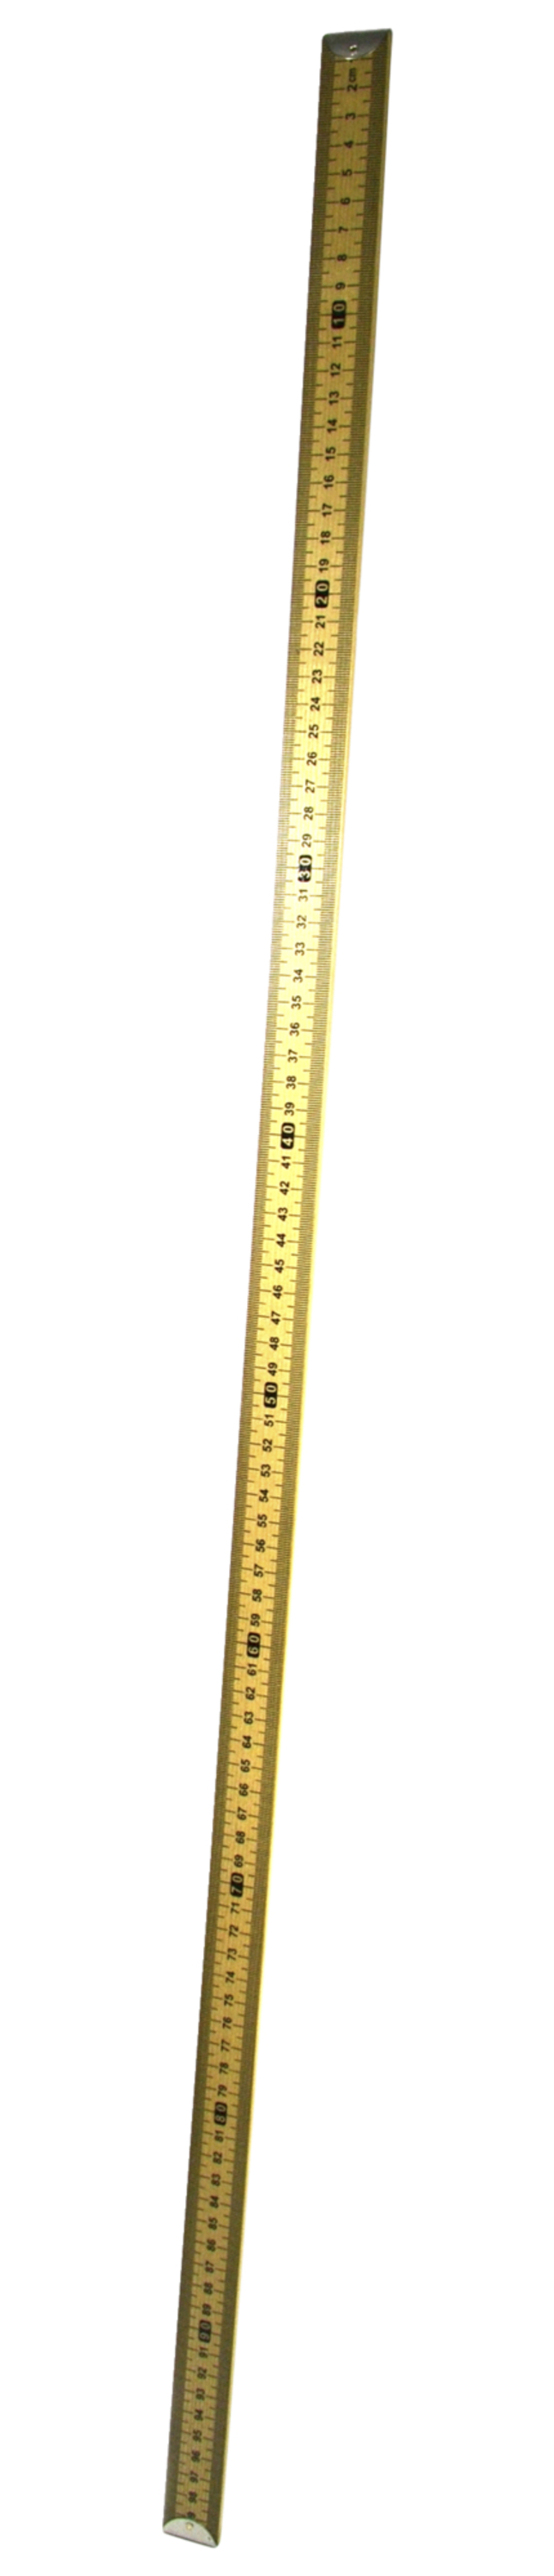 Learning Resources Wooden Meter Stick Plain Ends